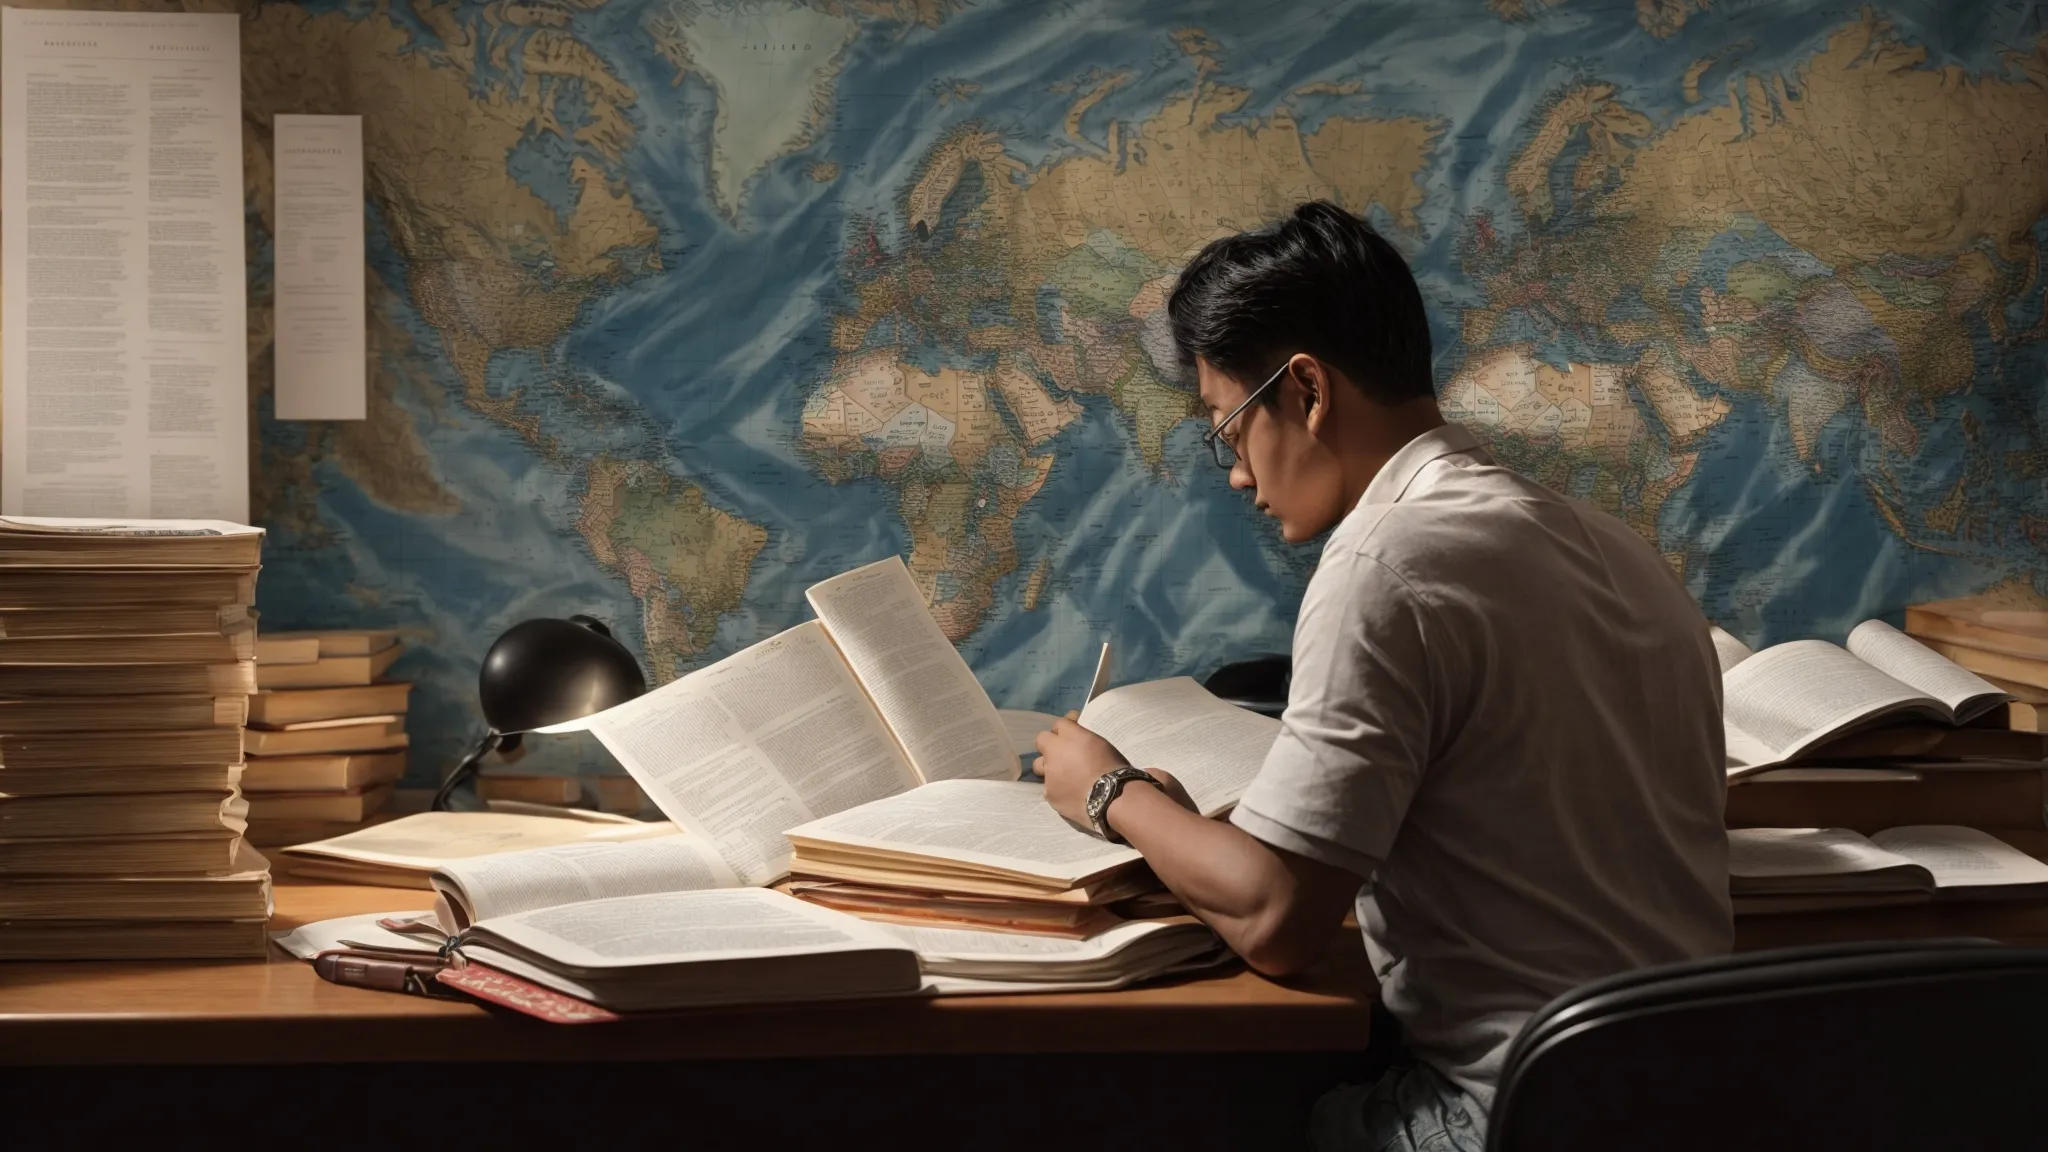 a person sitting at a desk with multiple world maps and language dictionaries opened, highlighting the international diversity of their research.